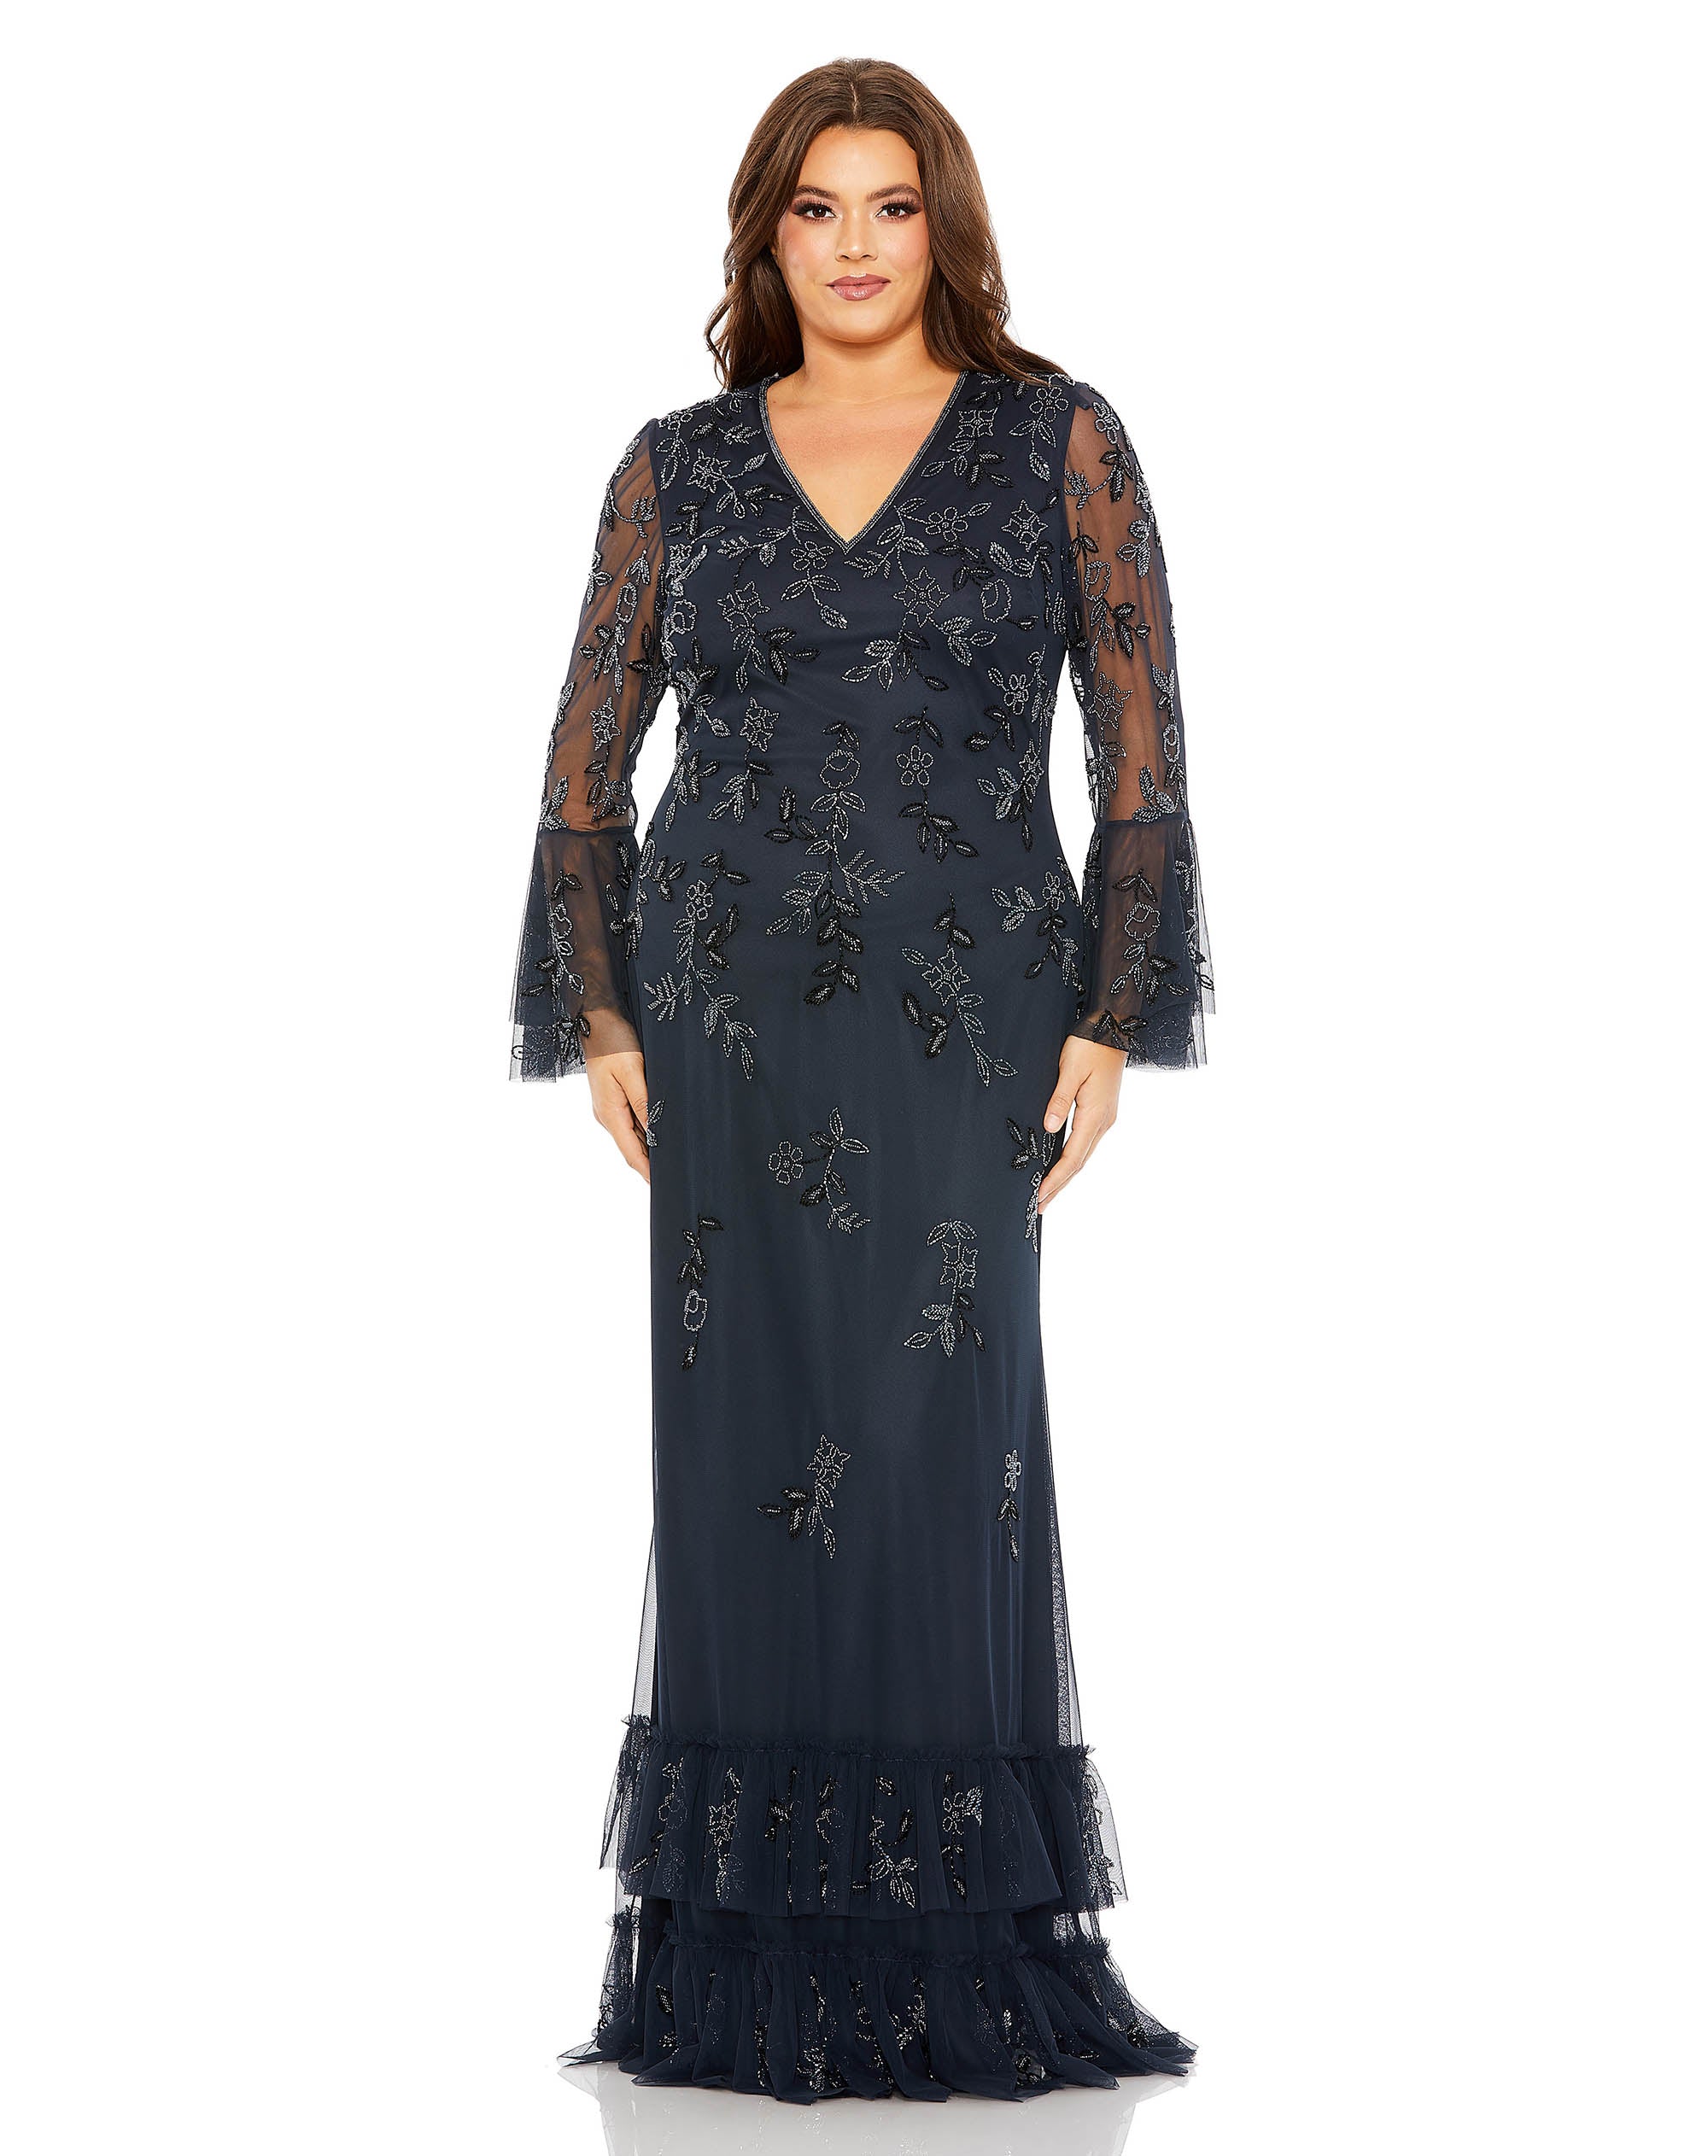 Plus Size Jersey Column Dress with Draped Sleeves